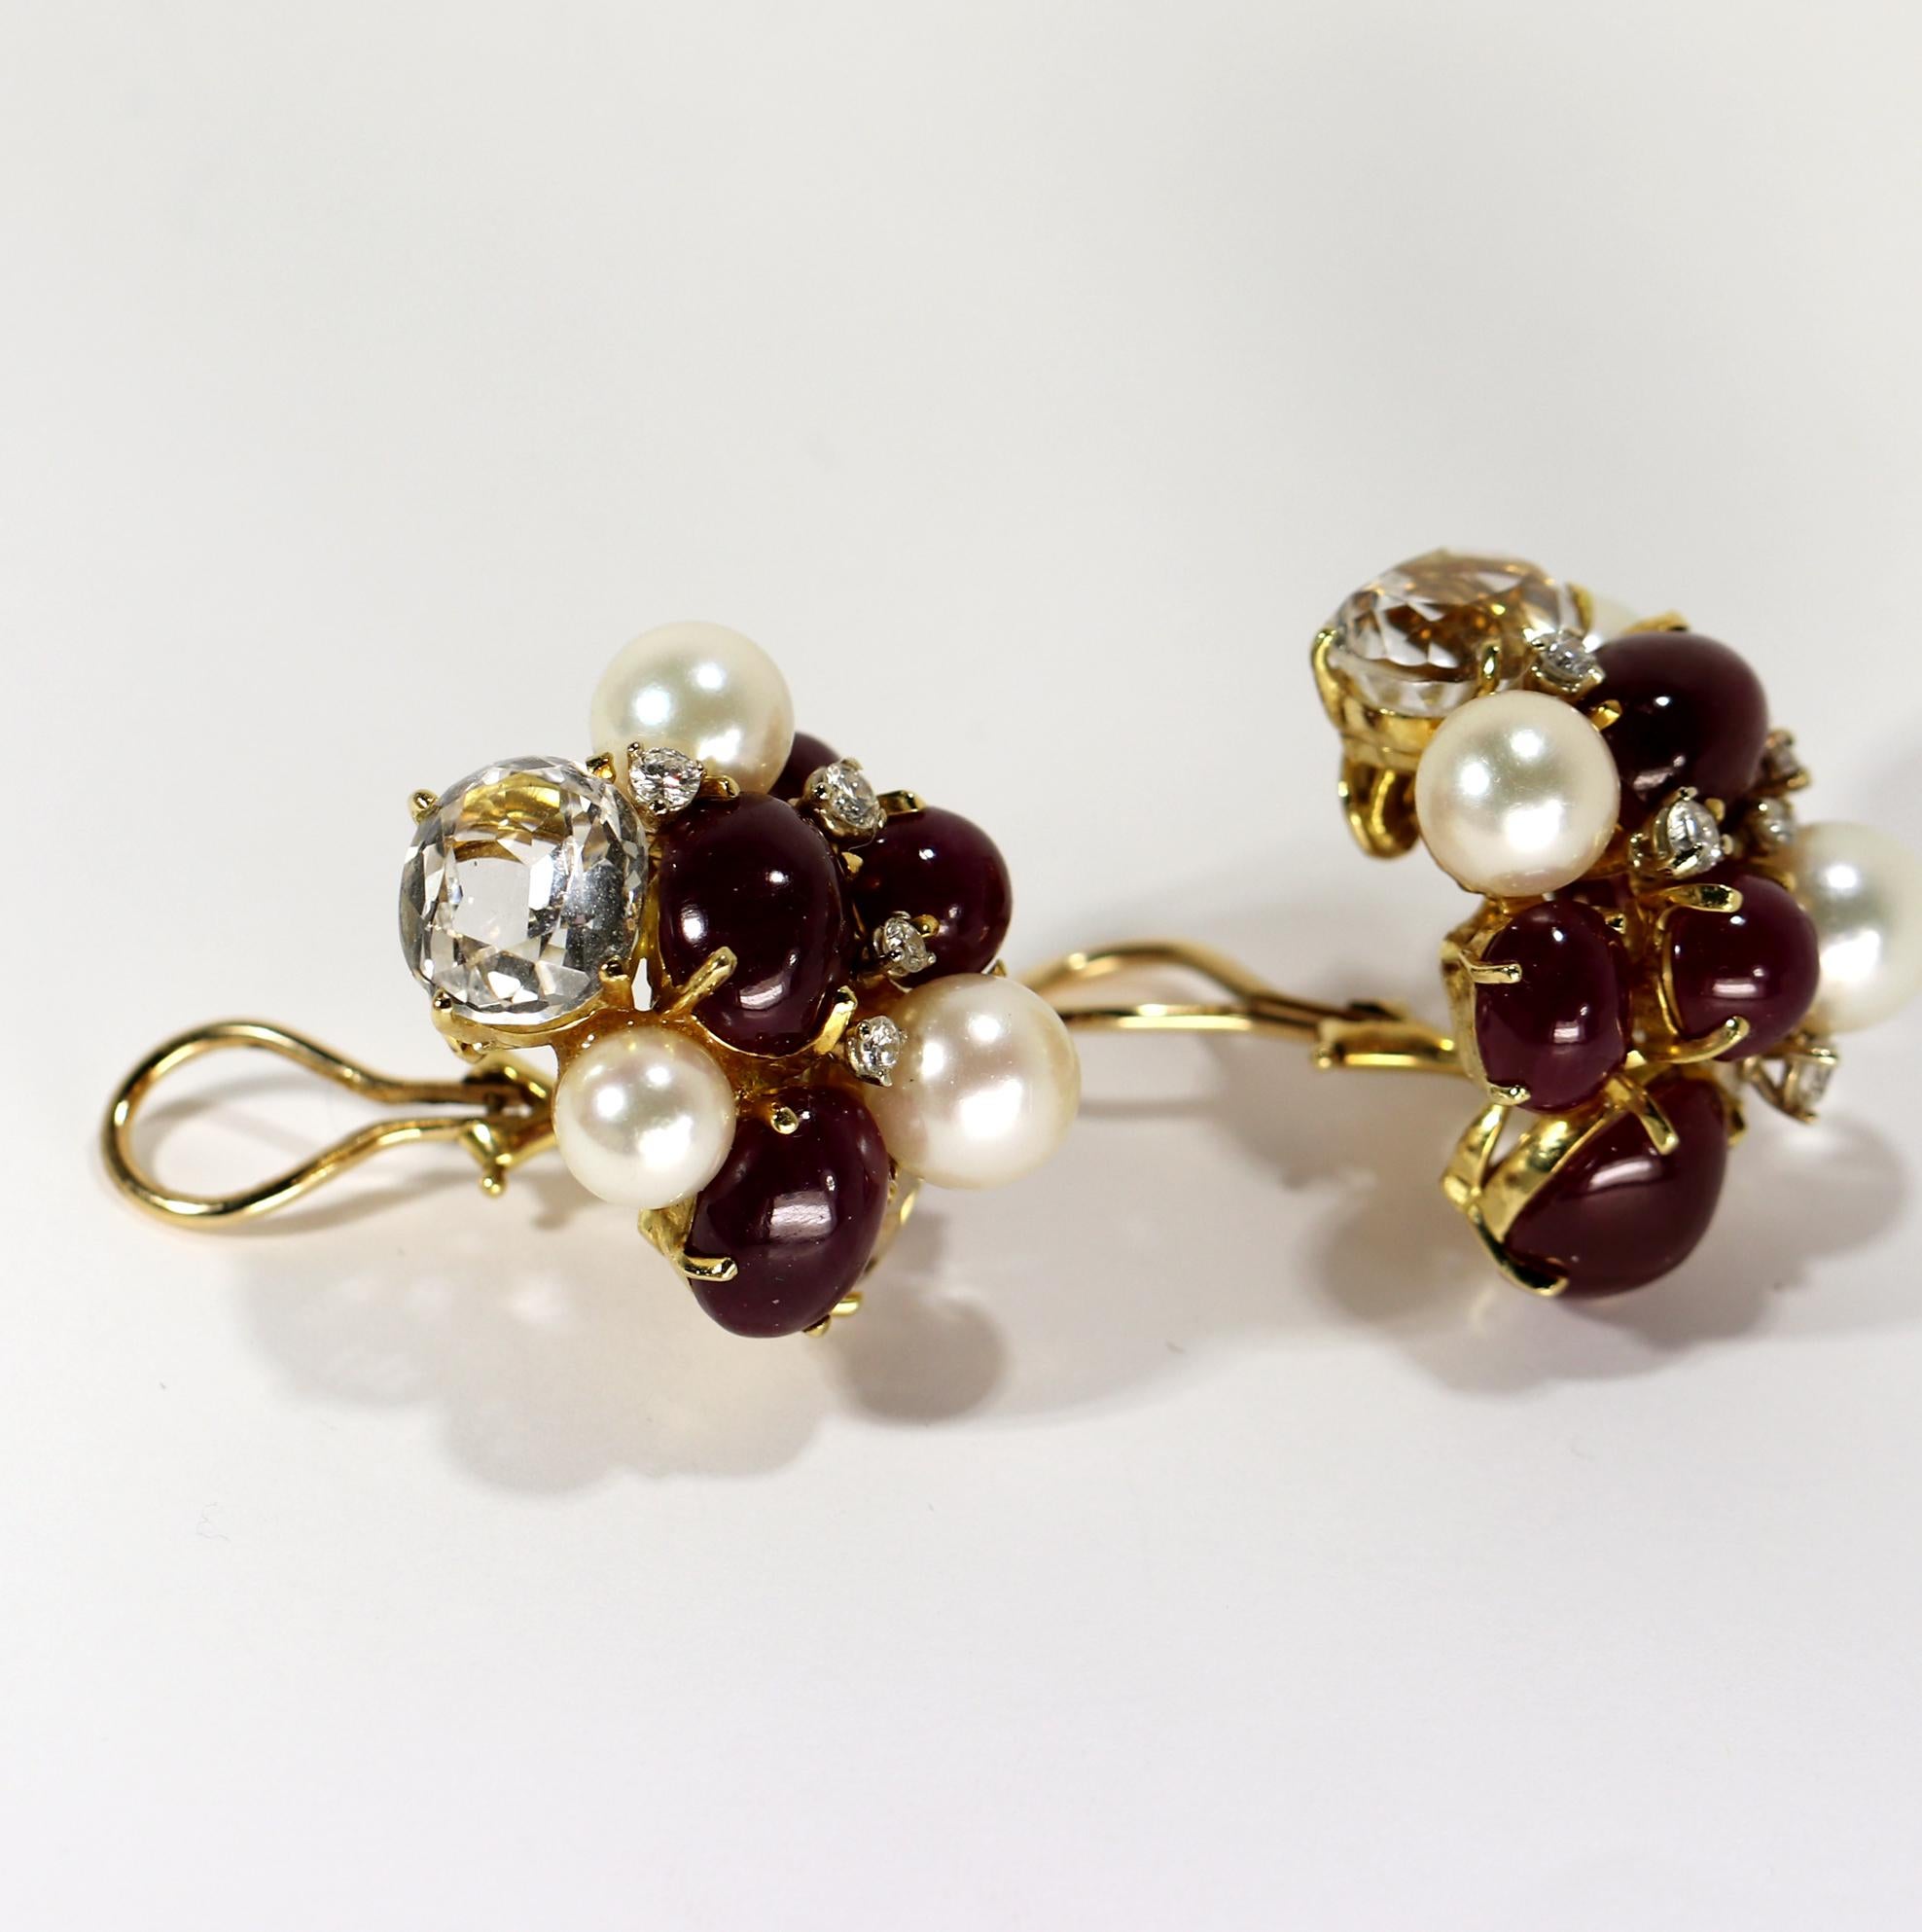 Cabochon Seaman Schepps Bubble Earrings with Rubies Diamonds and Pearls